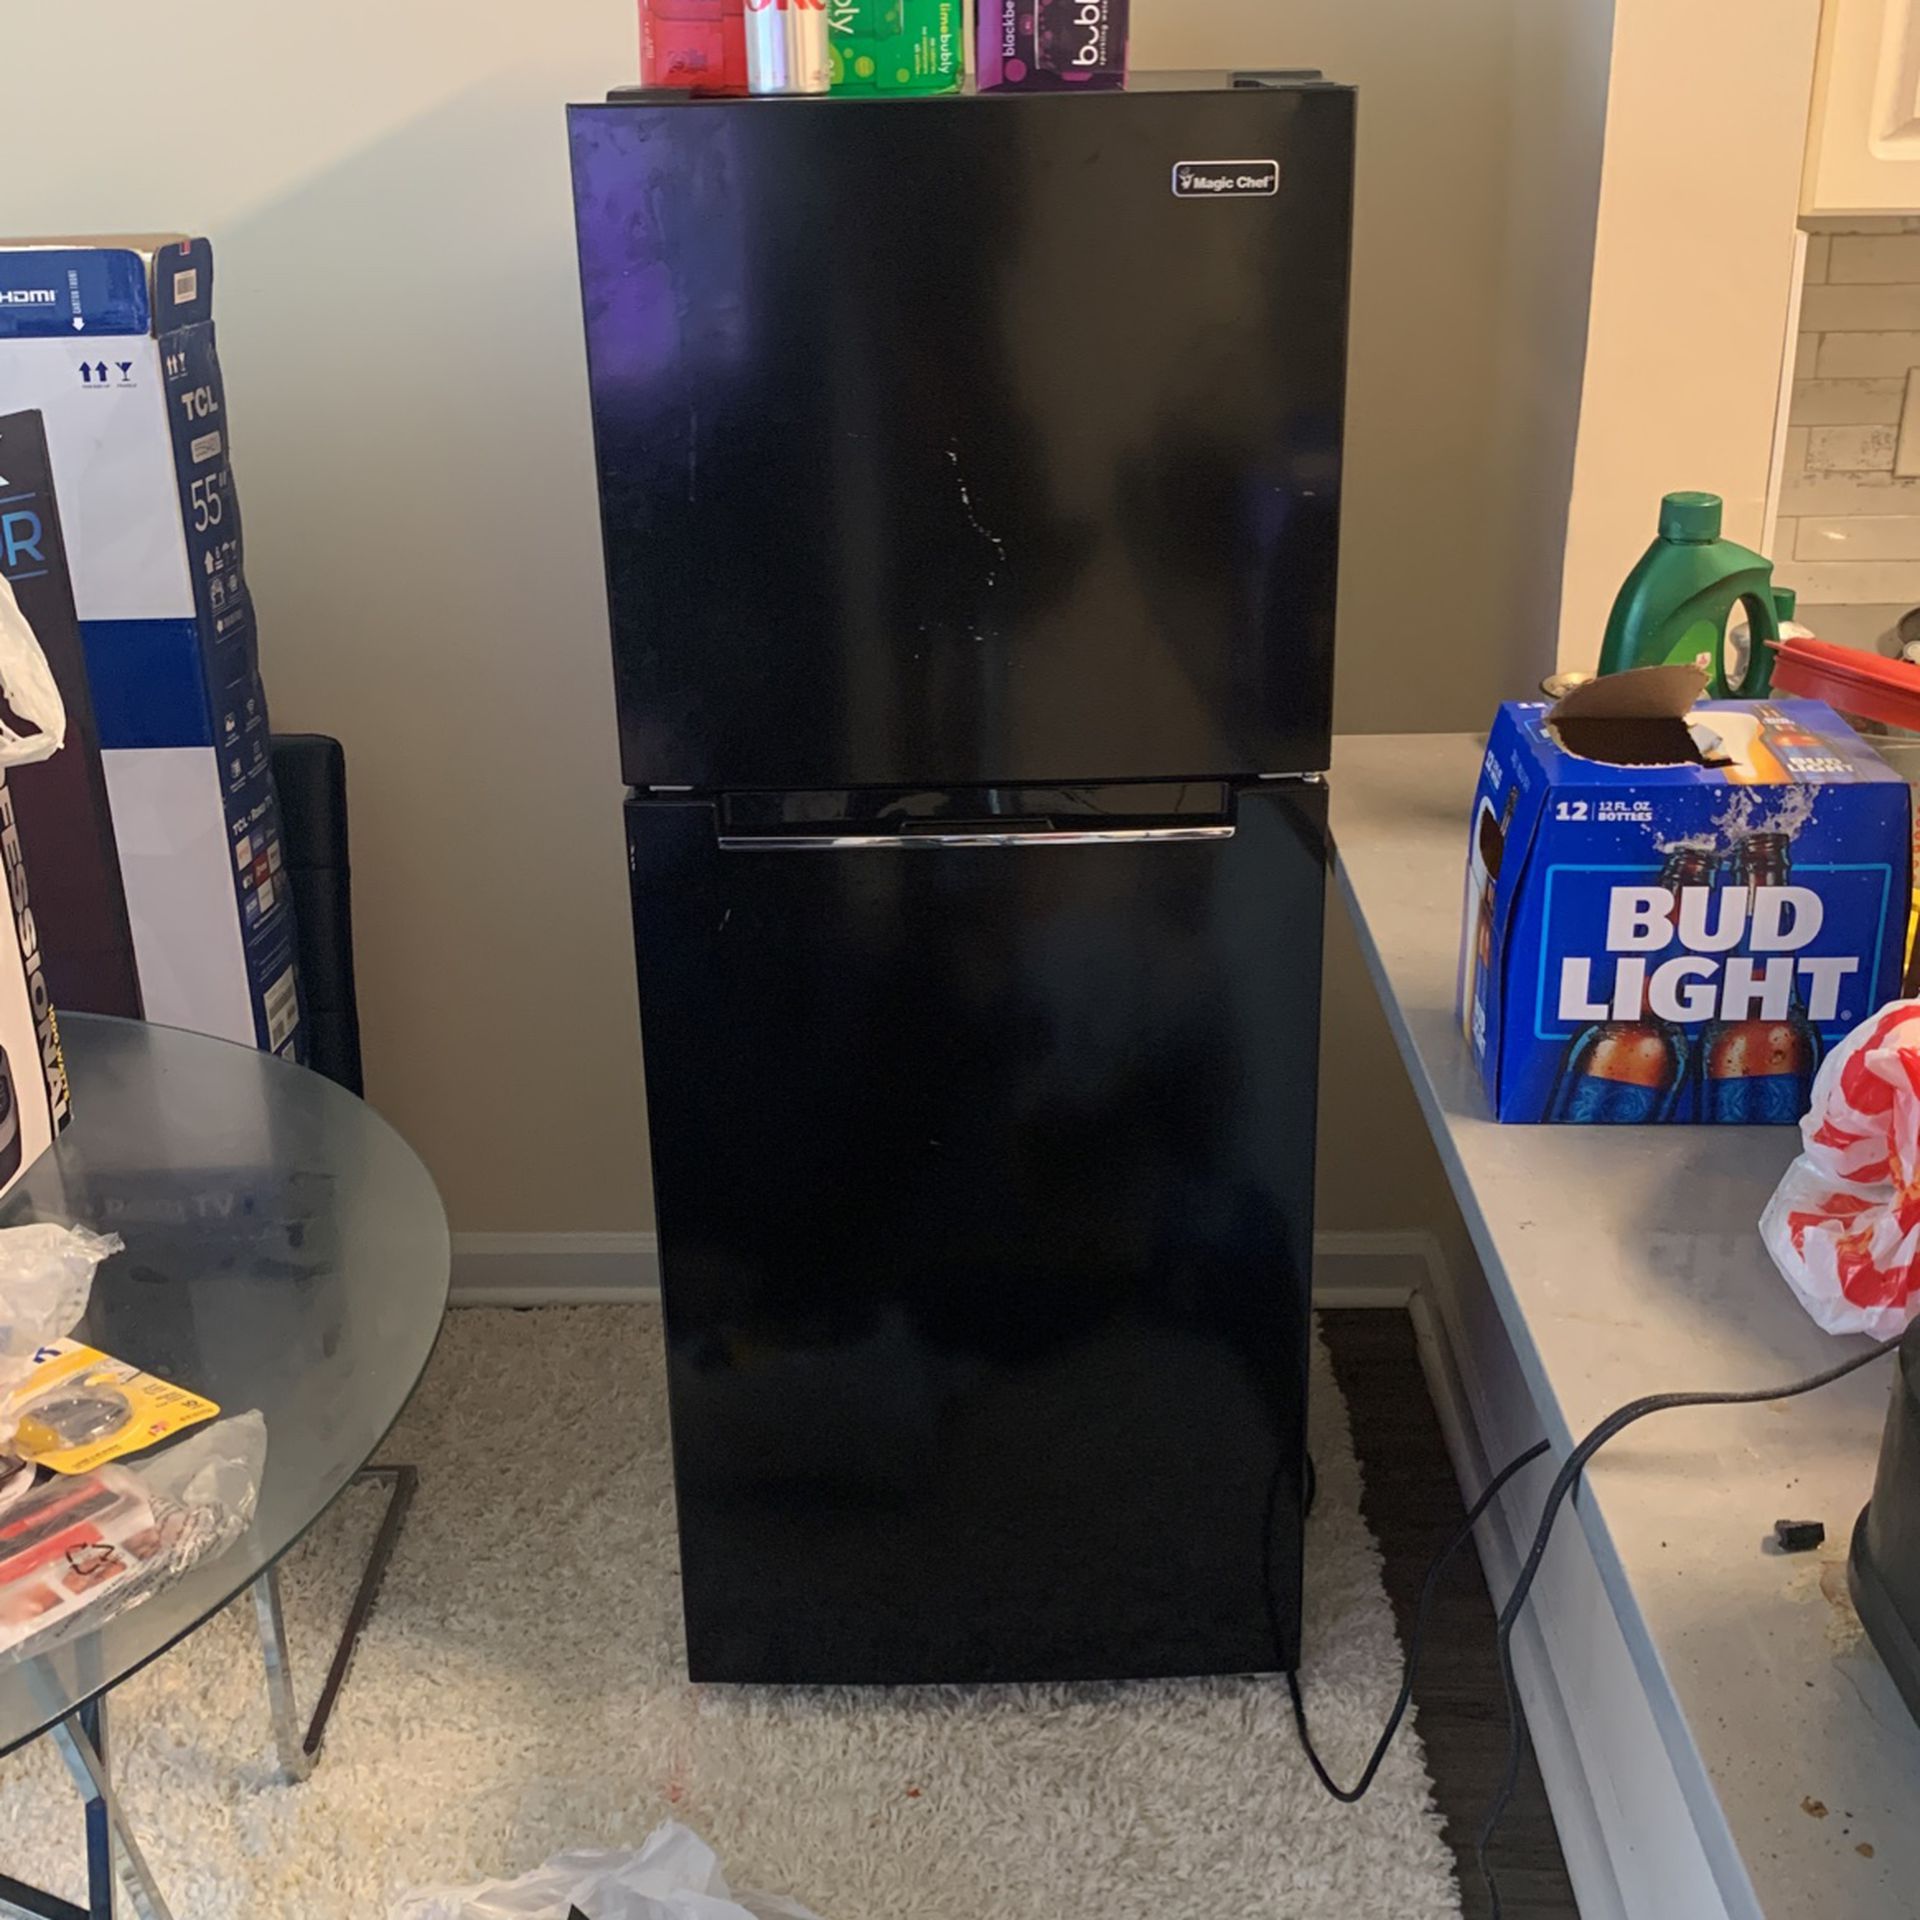 Magic Chef Medium Sized Refrigerator ! Top Freezer! No Cooling Issues At All.